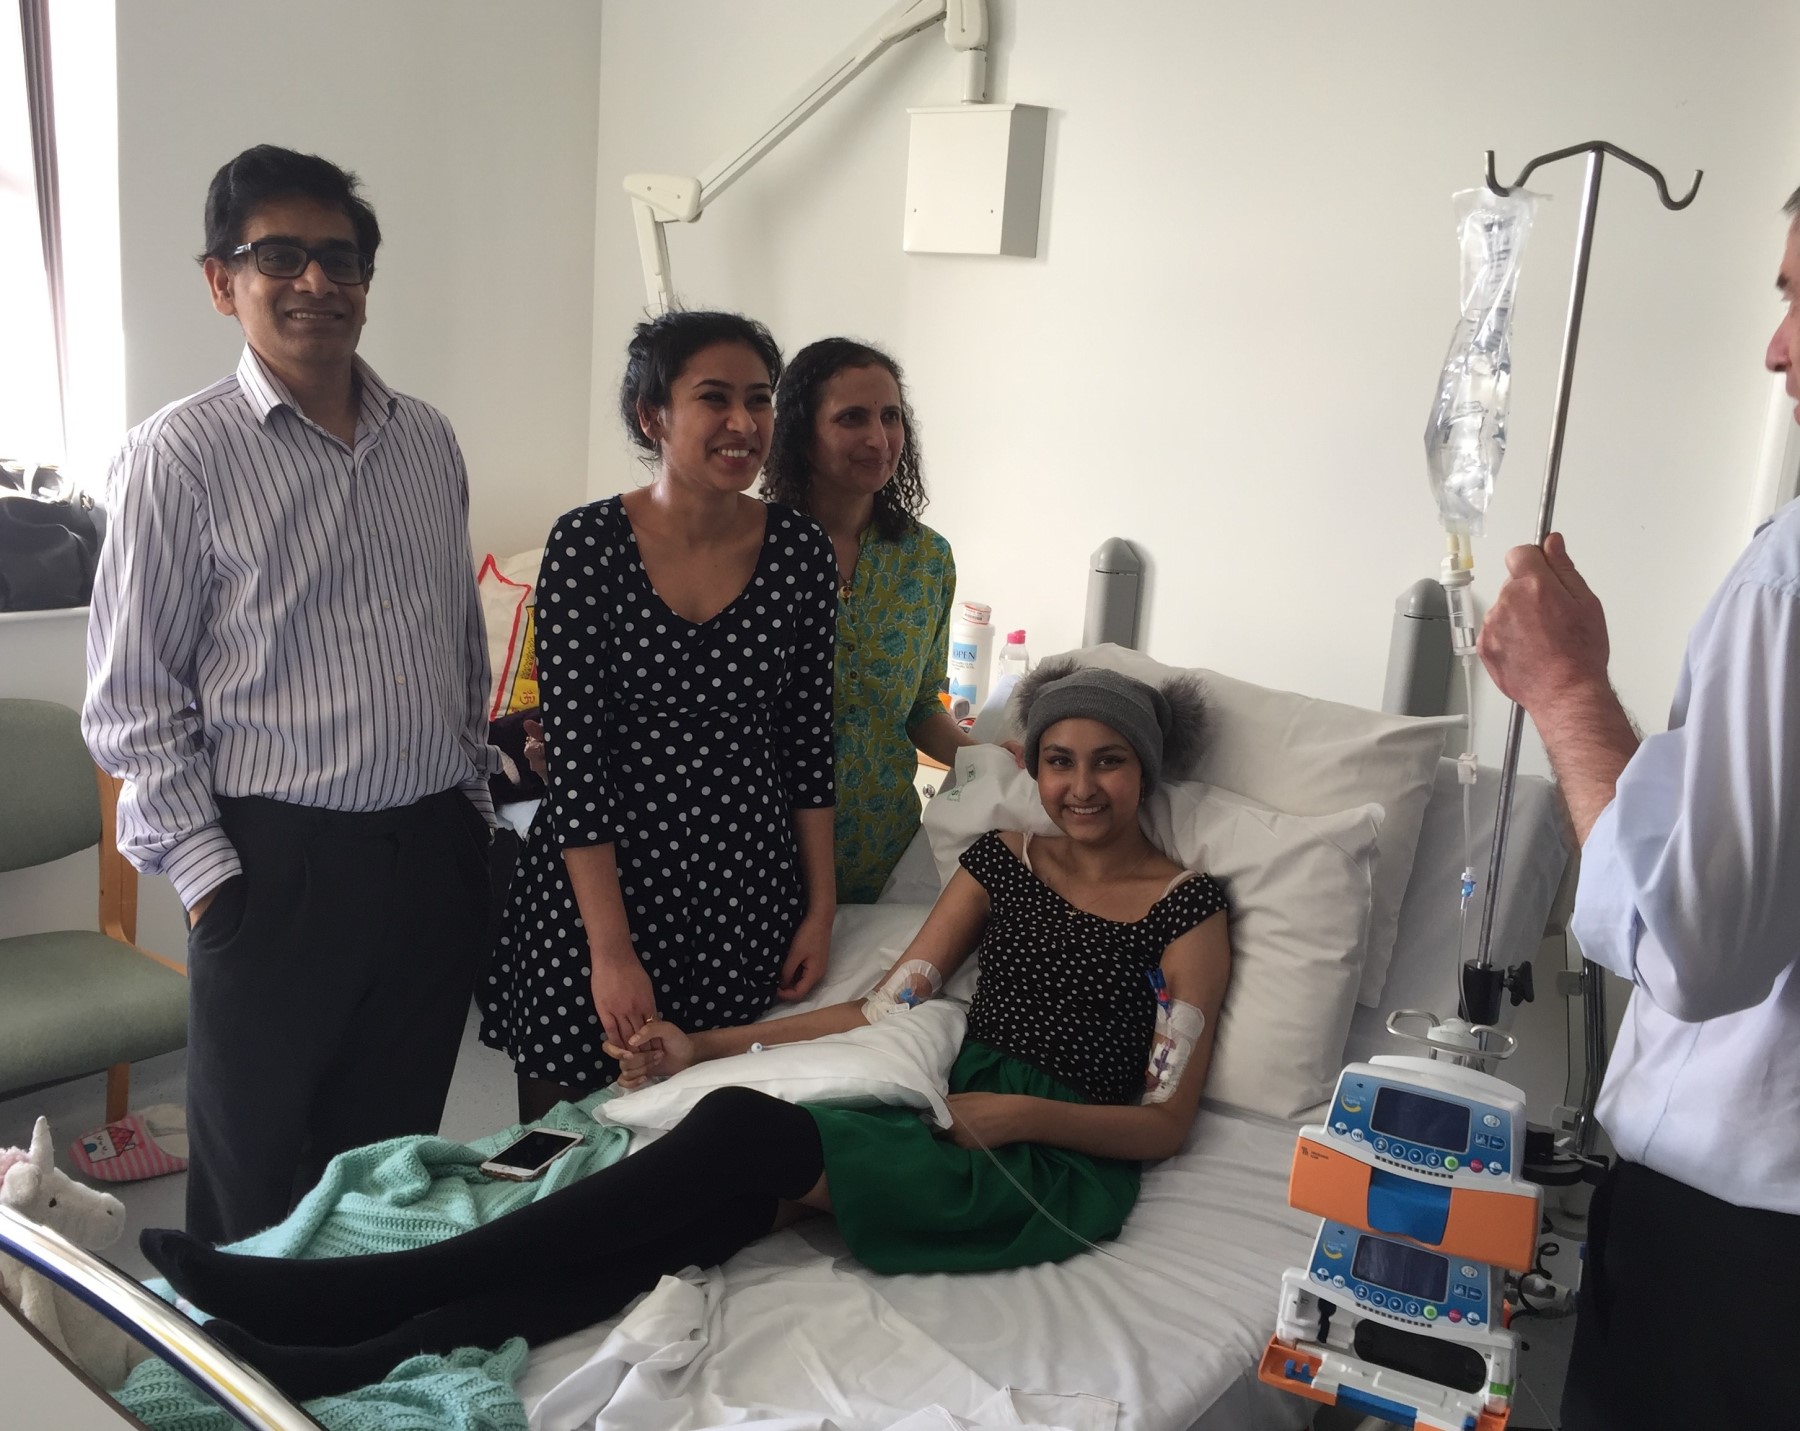 Nitya receiving CAR-T therapy at the hospital with family